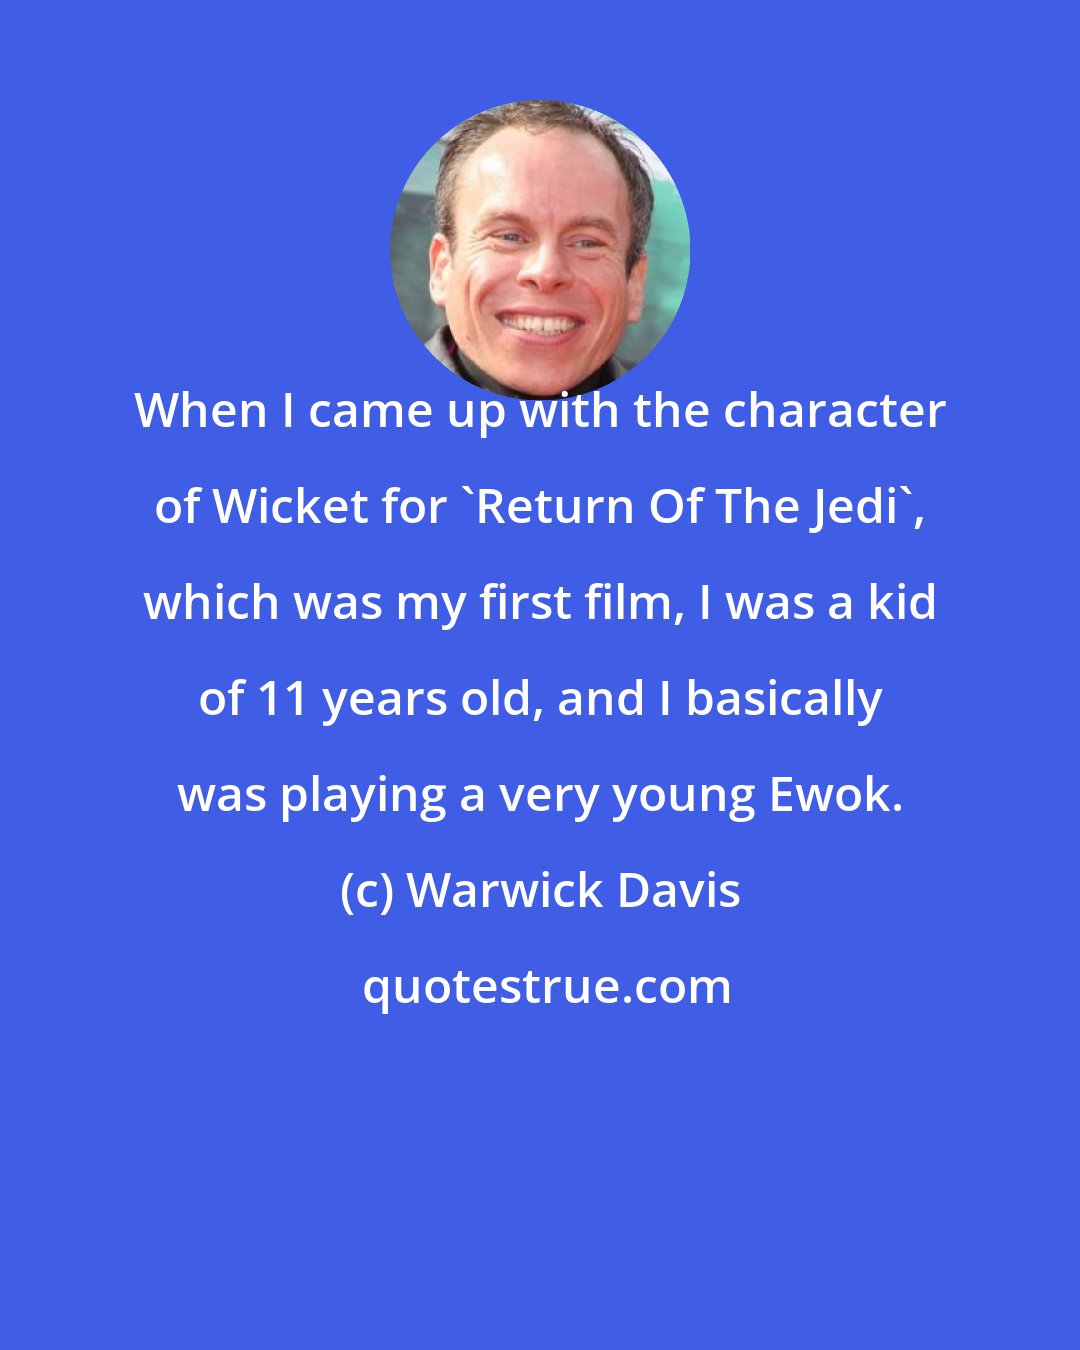 Warwick Davis: When I came up with the character of Wicket for 'Return Of The Jedi', which was my first film, I was a kid of 11 years old, and I basically was playing a very young Ewok.